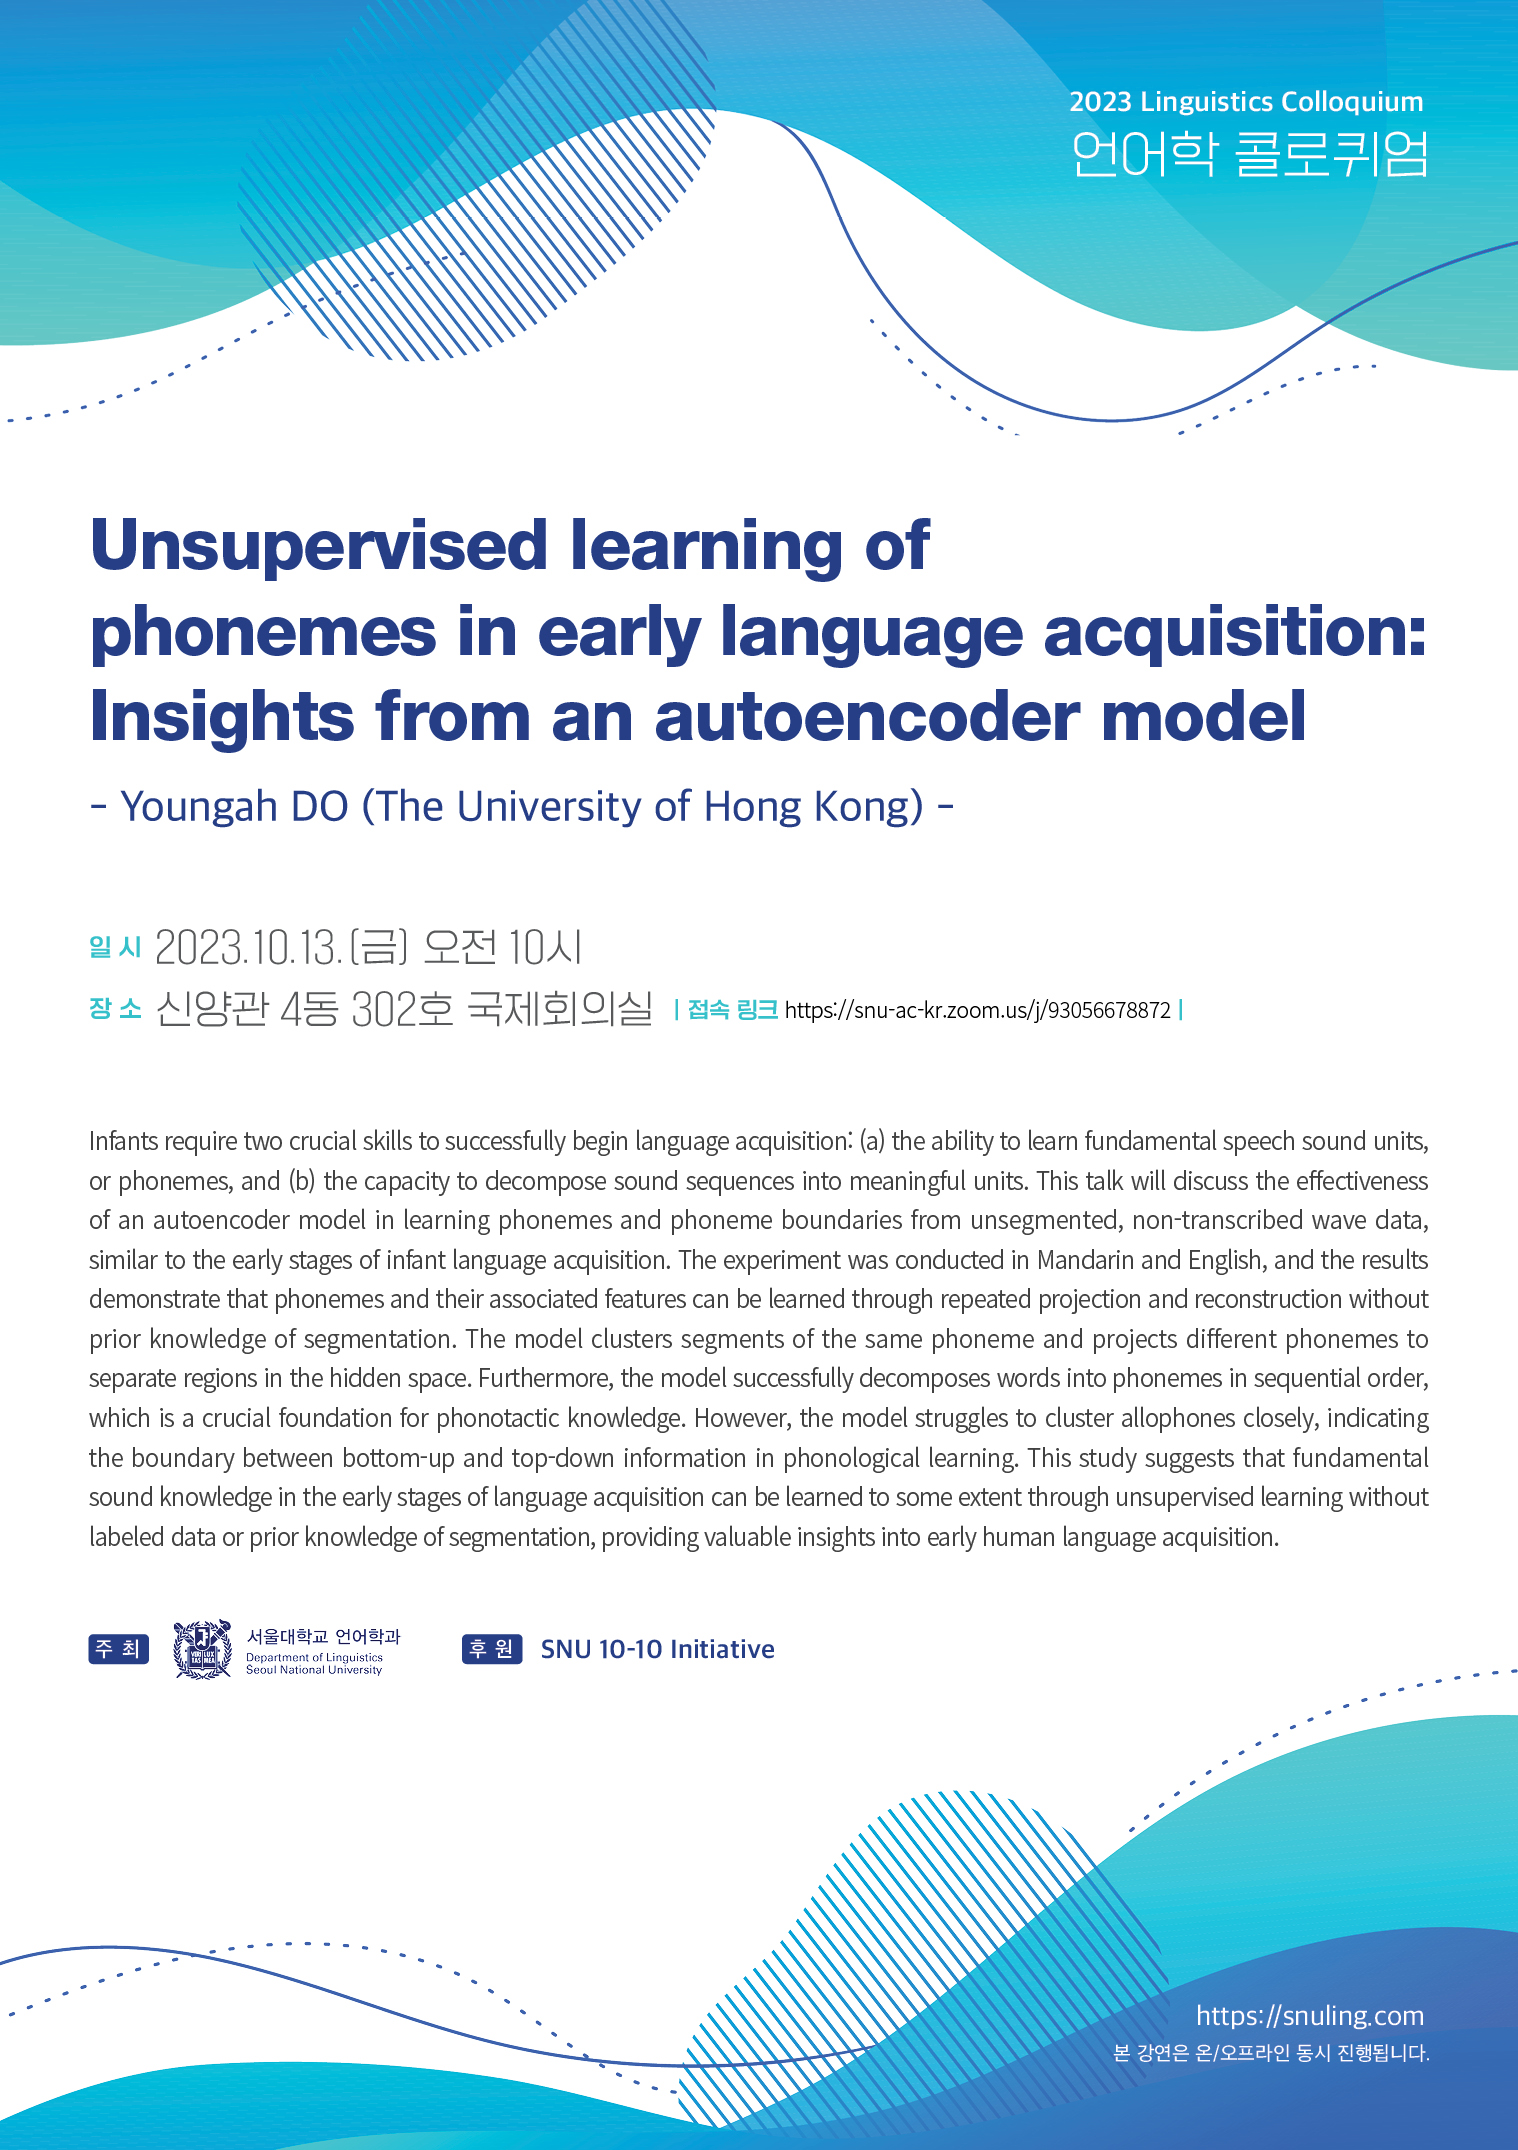 Unsupervised learning of phonemes in early language acquisition: Insights from an autoencoder model @ SNU